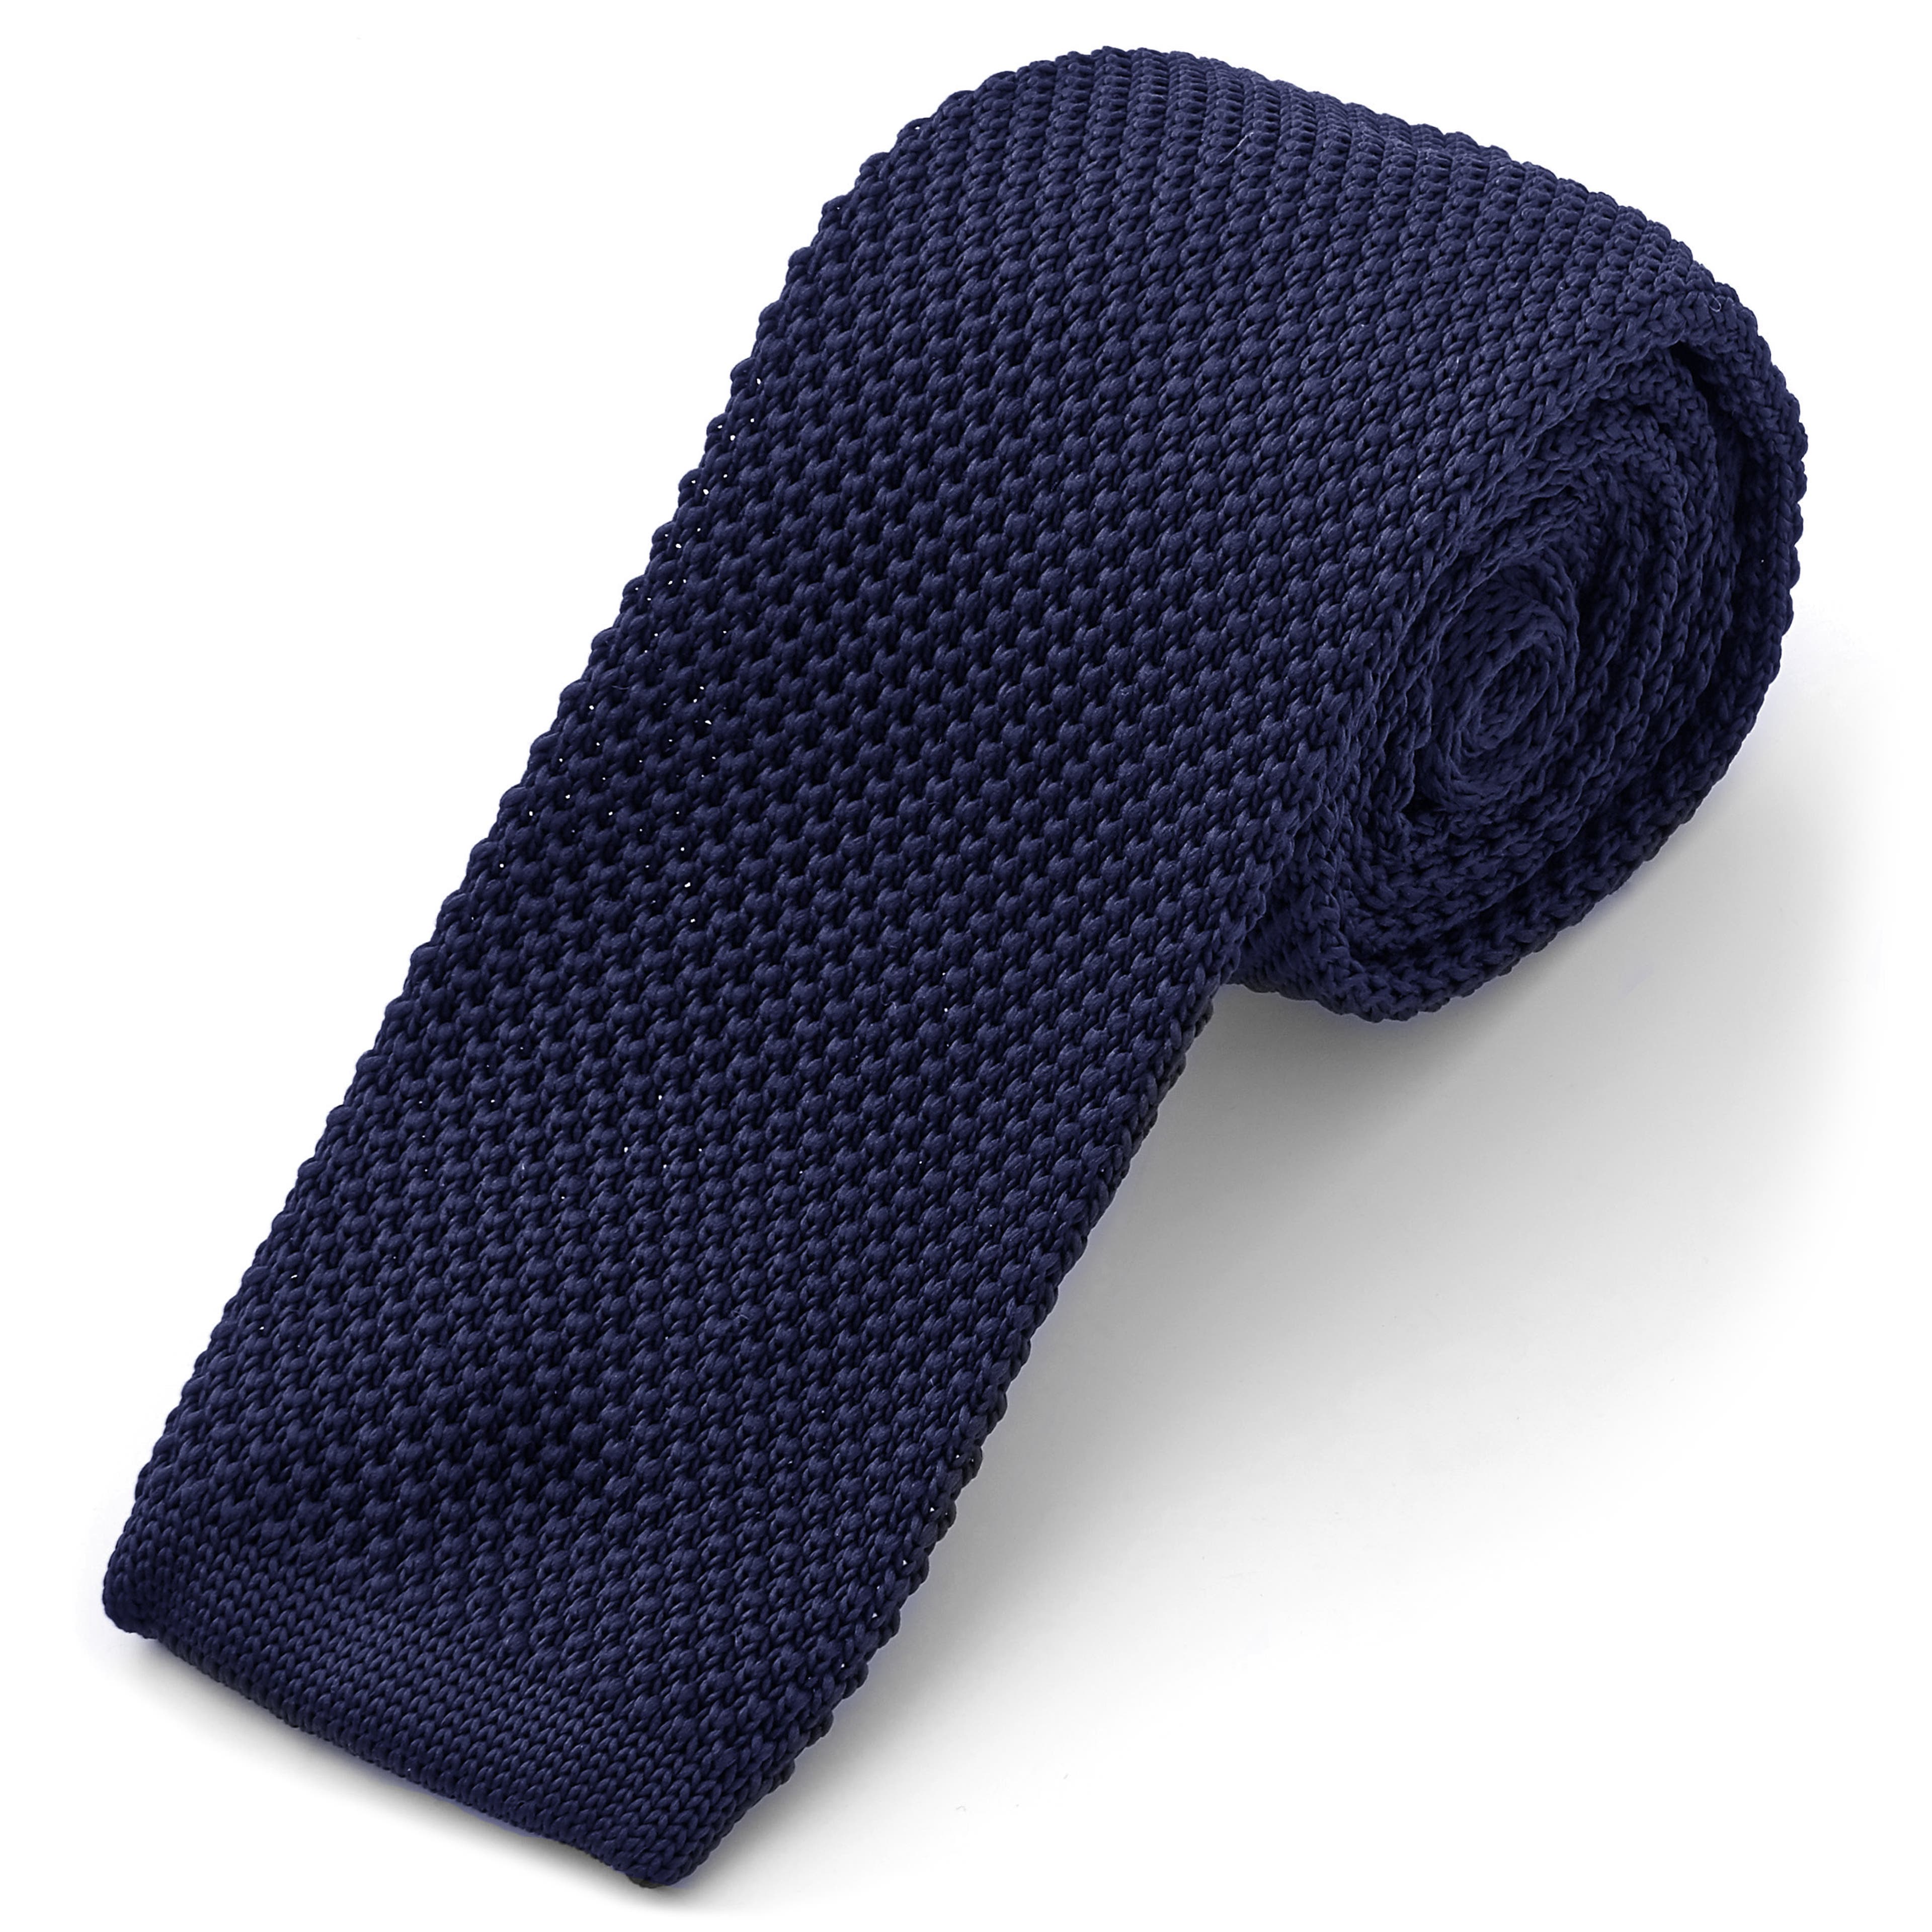 Navy Blue Knitted Tie